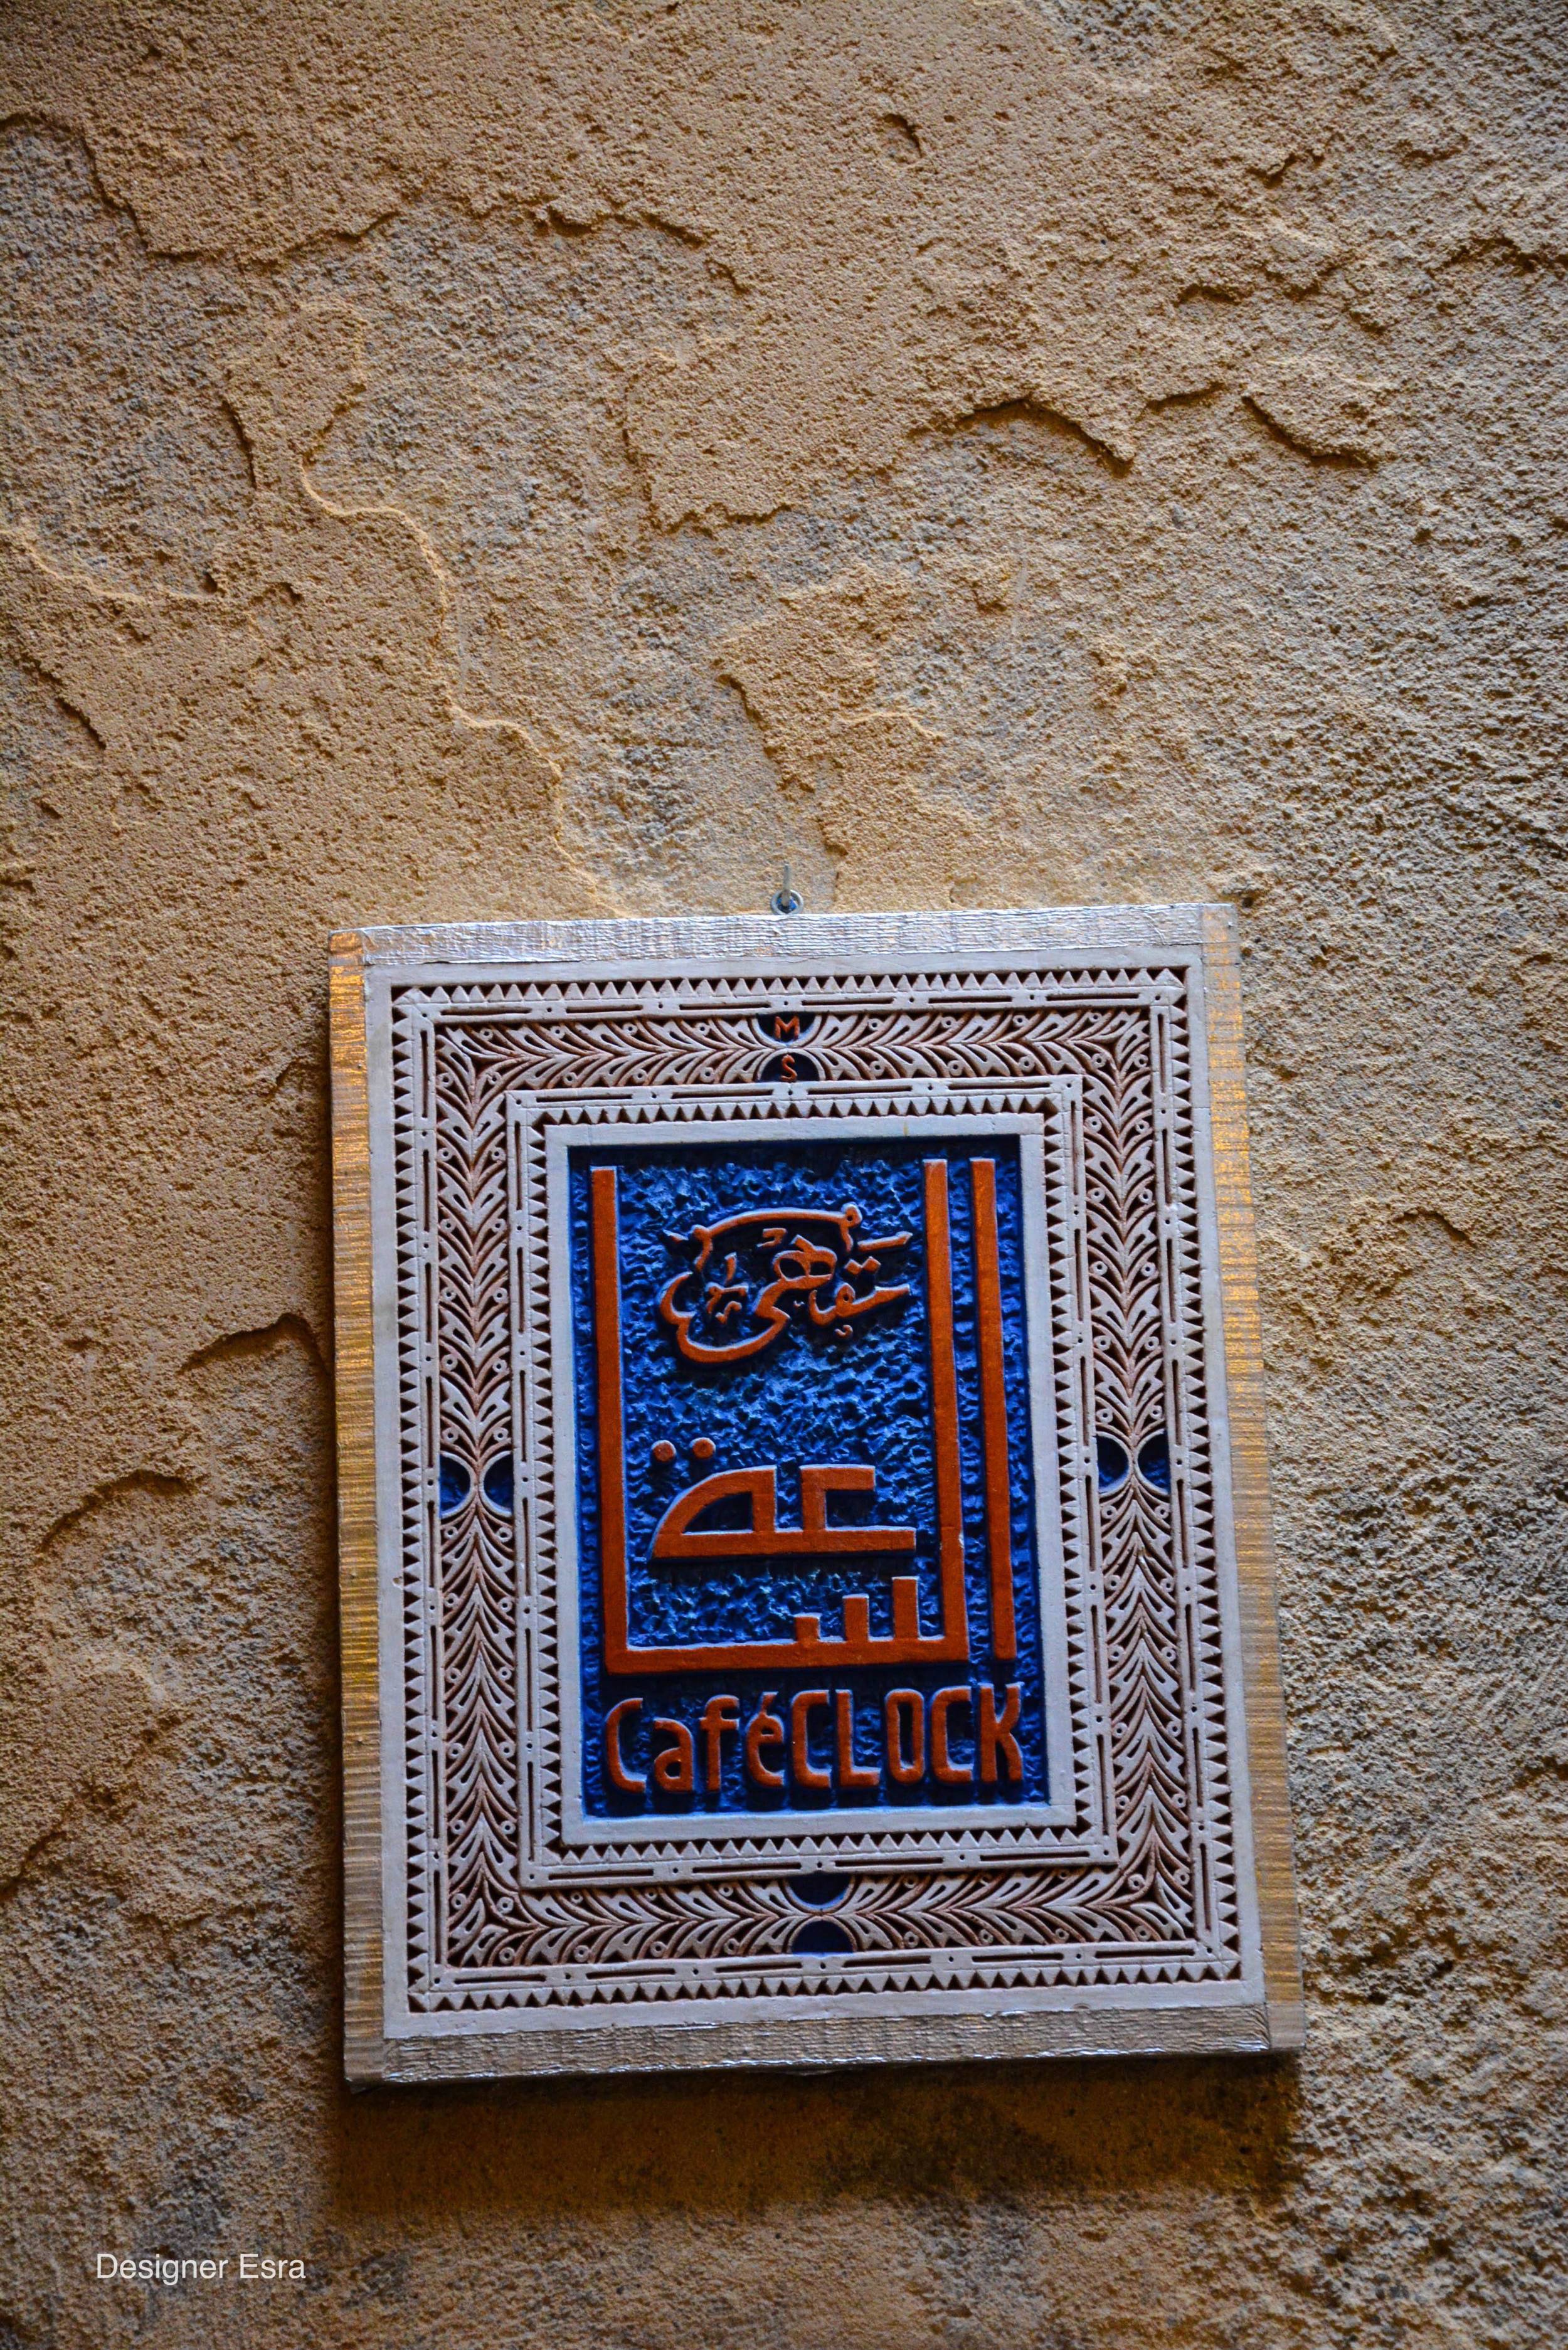 Cafe Clock in Fes, Morocco